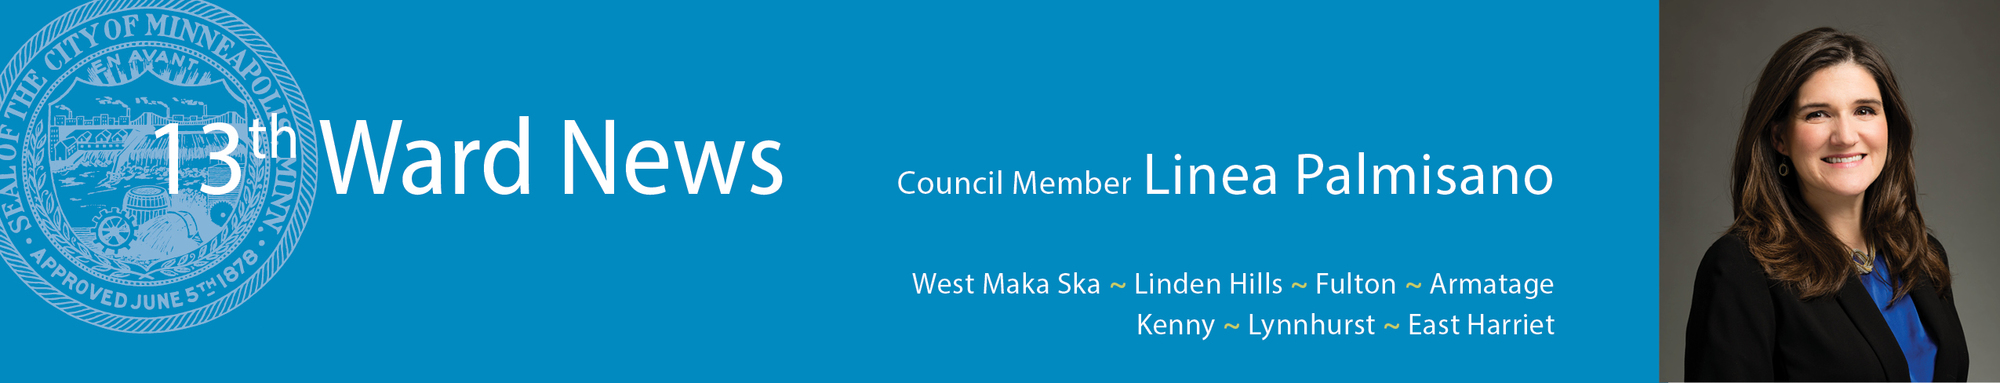 13th Ward News from Minneapolis Council Member Linea Palmisano